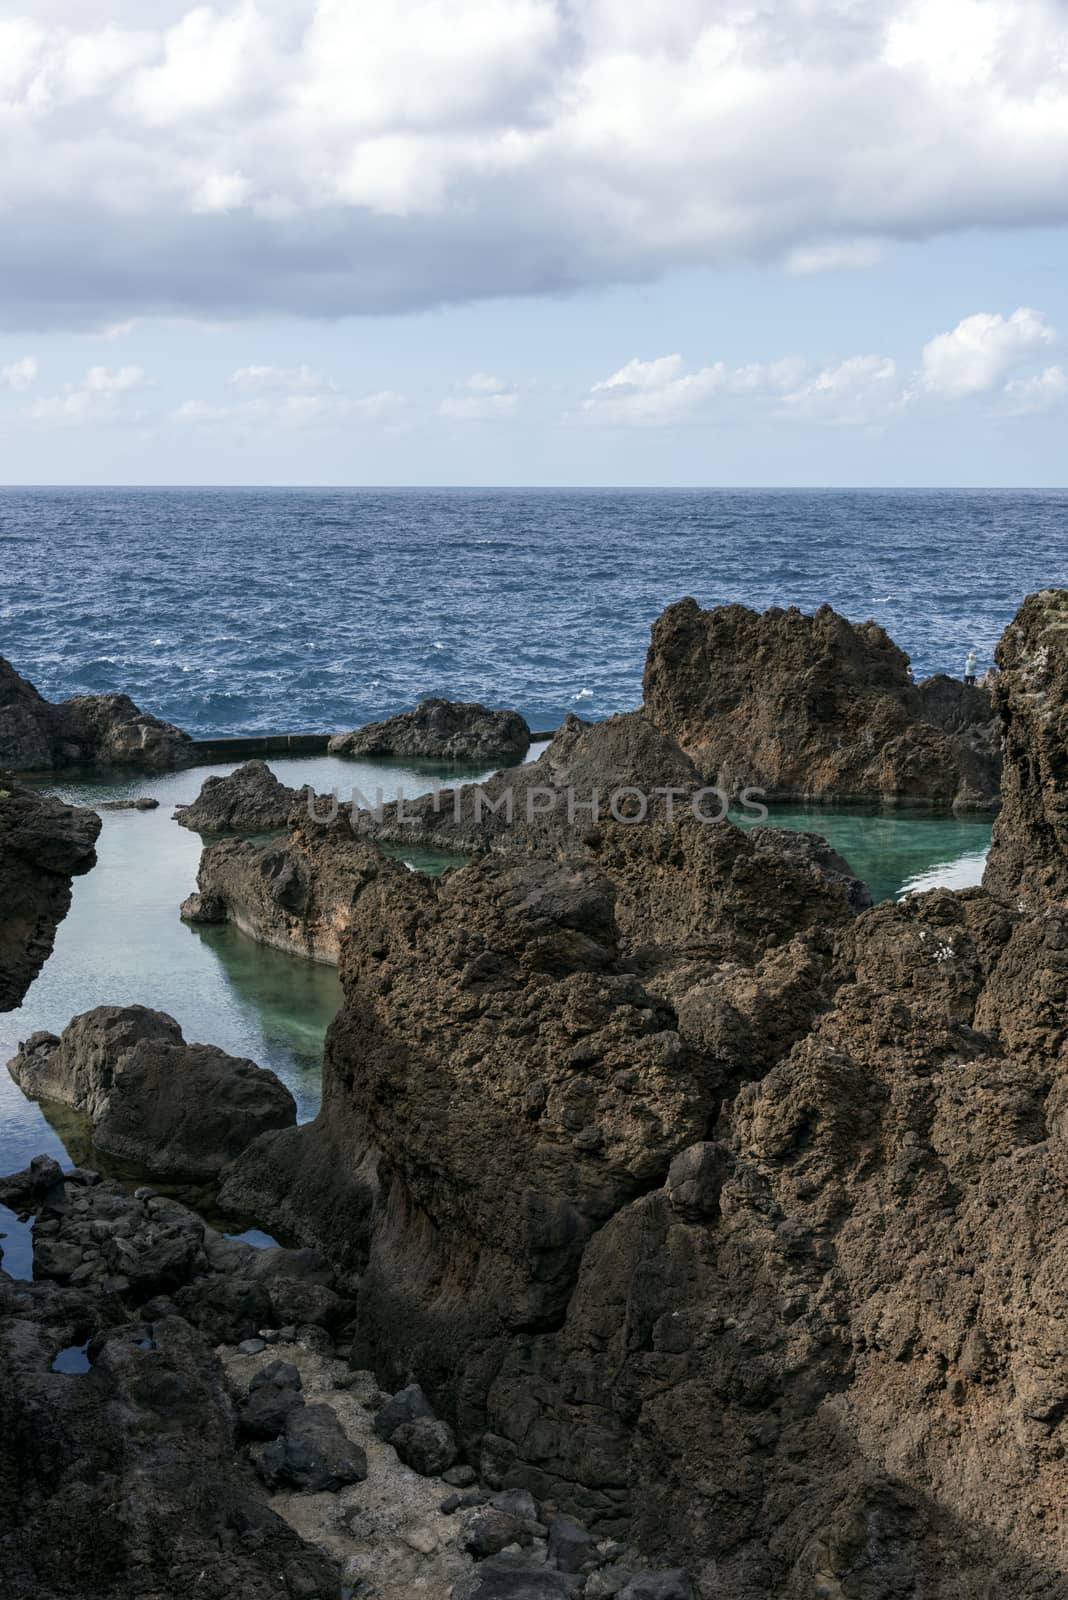 Natural volcano lava pool by compuinfoto